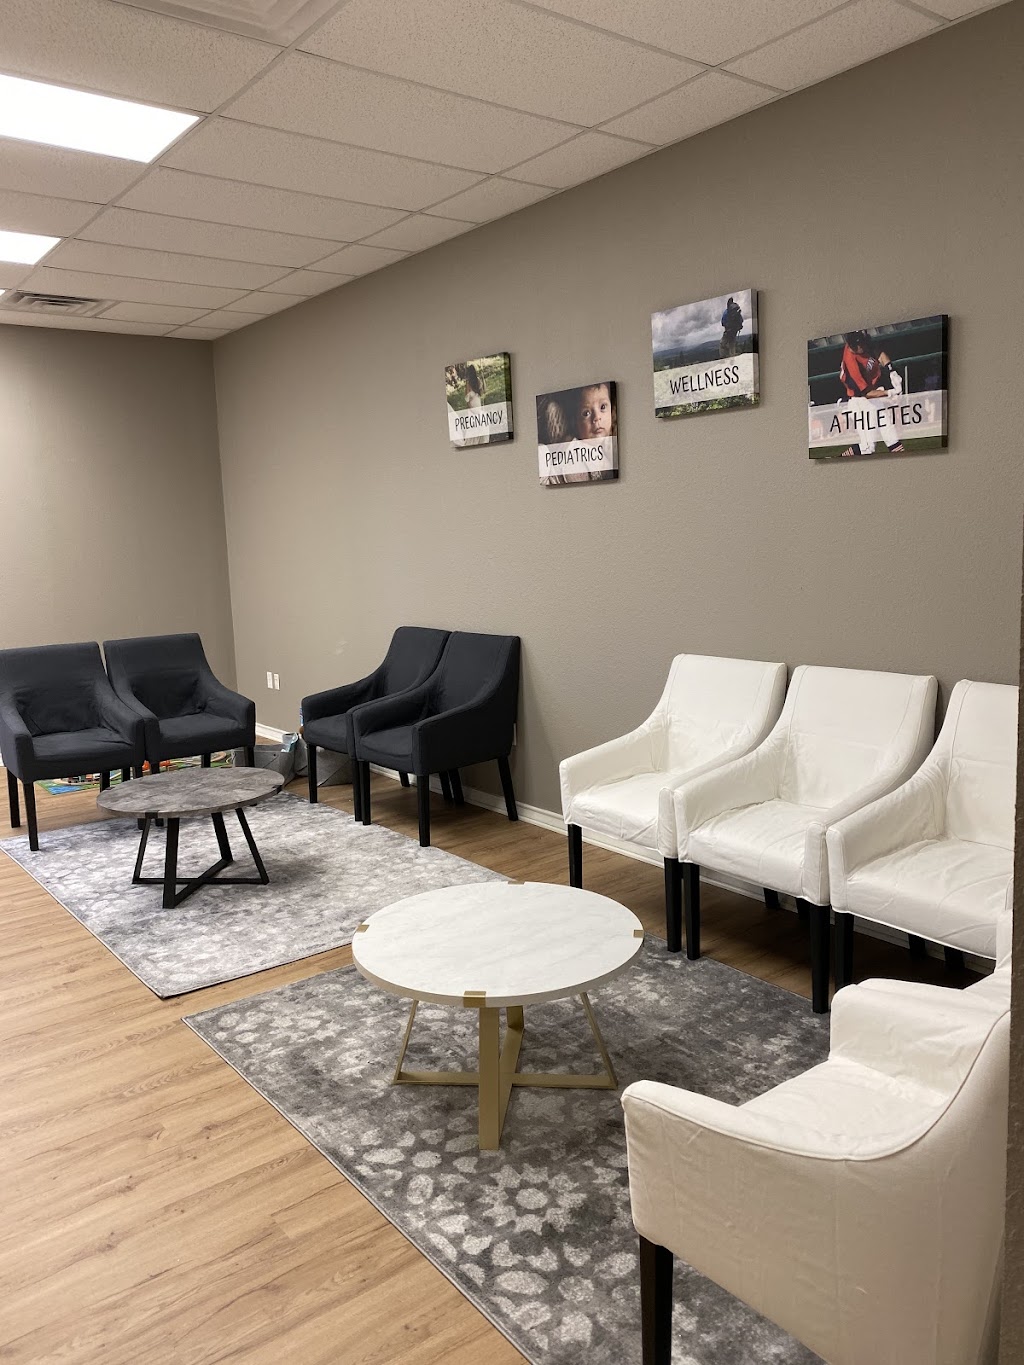 Connected Life Chiropractic | 4112 Williams Dr Suite 108, Georgetown, TX 78628 | Phone: (512) 688-4032